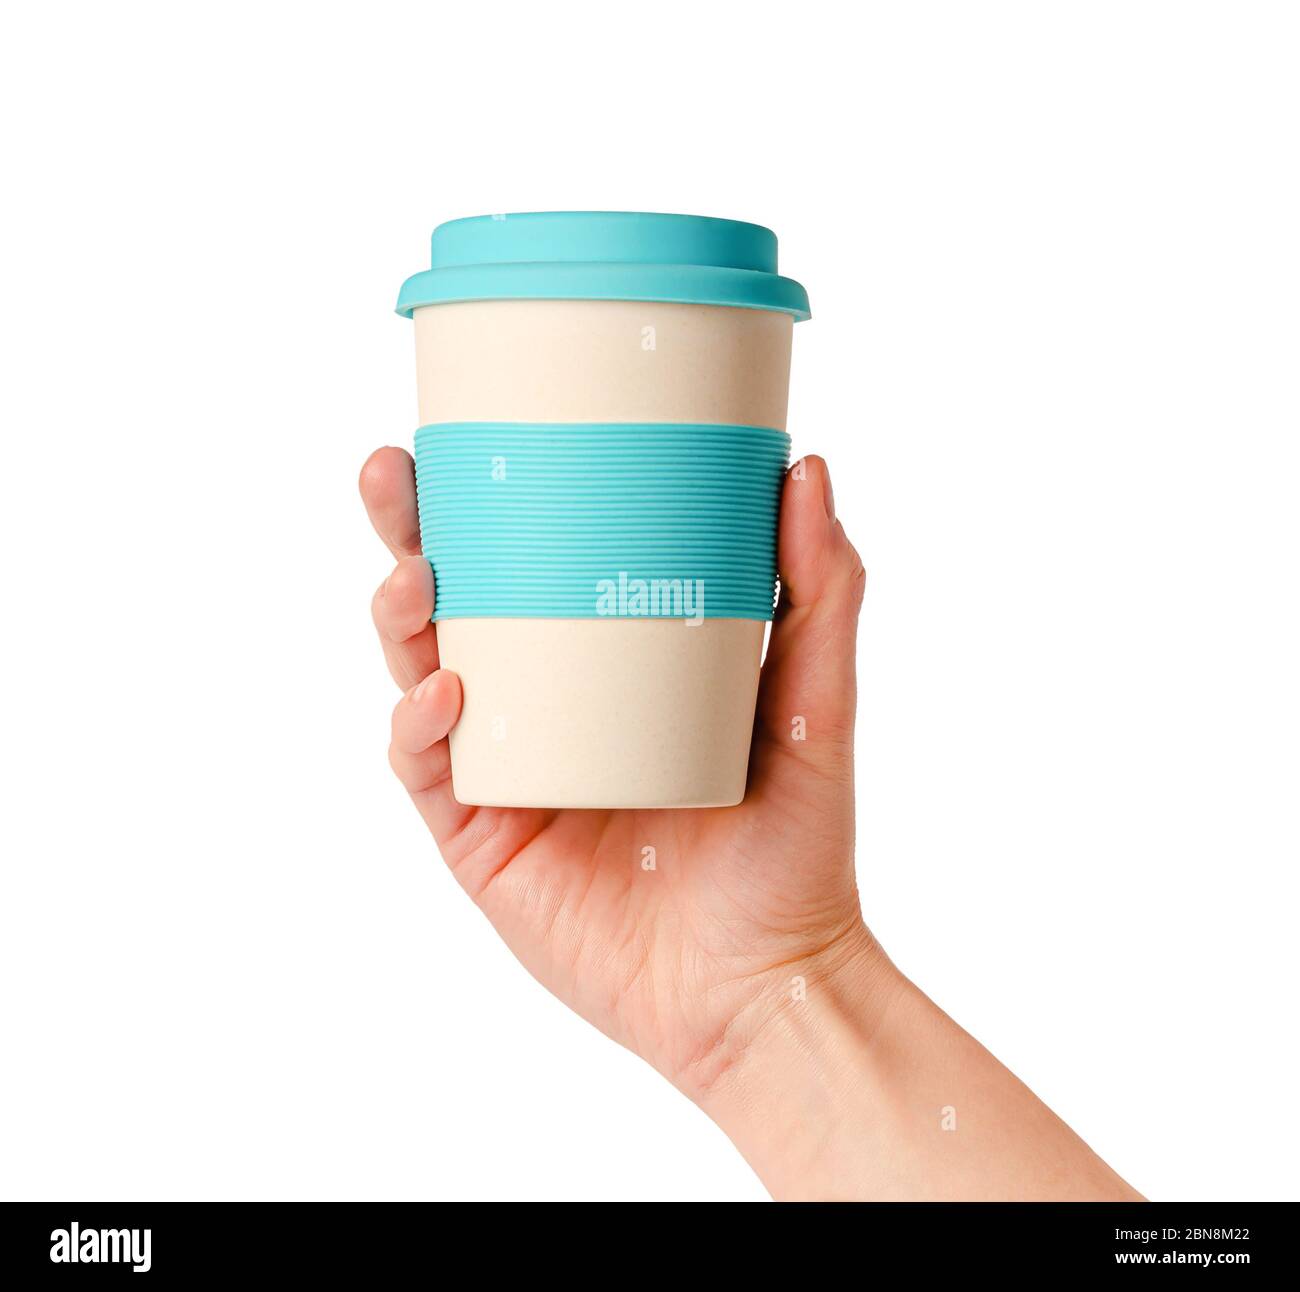 https://c8.alamy.com/comp/2BN8M22/reusable-bamboo-coffee-cup-with-silicone-holder-in-female-hand-isolated-on-white-zero-waste-lifestyle-2BN8M22.jpg